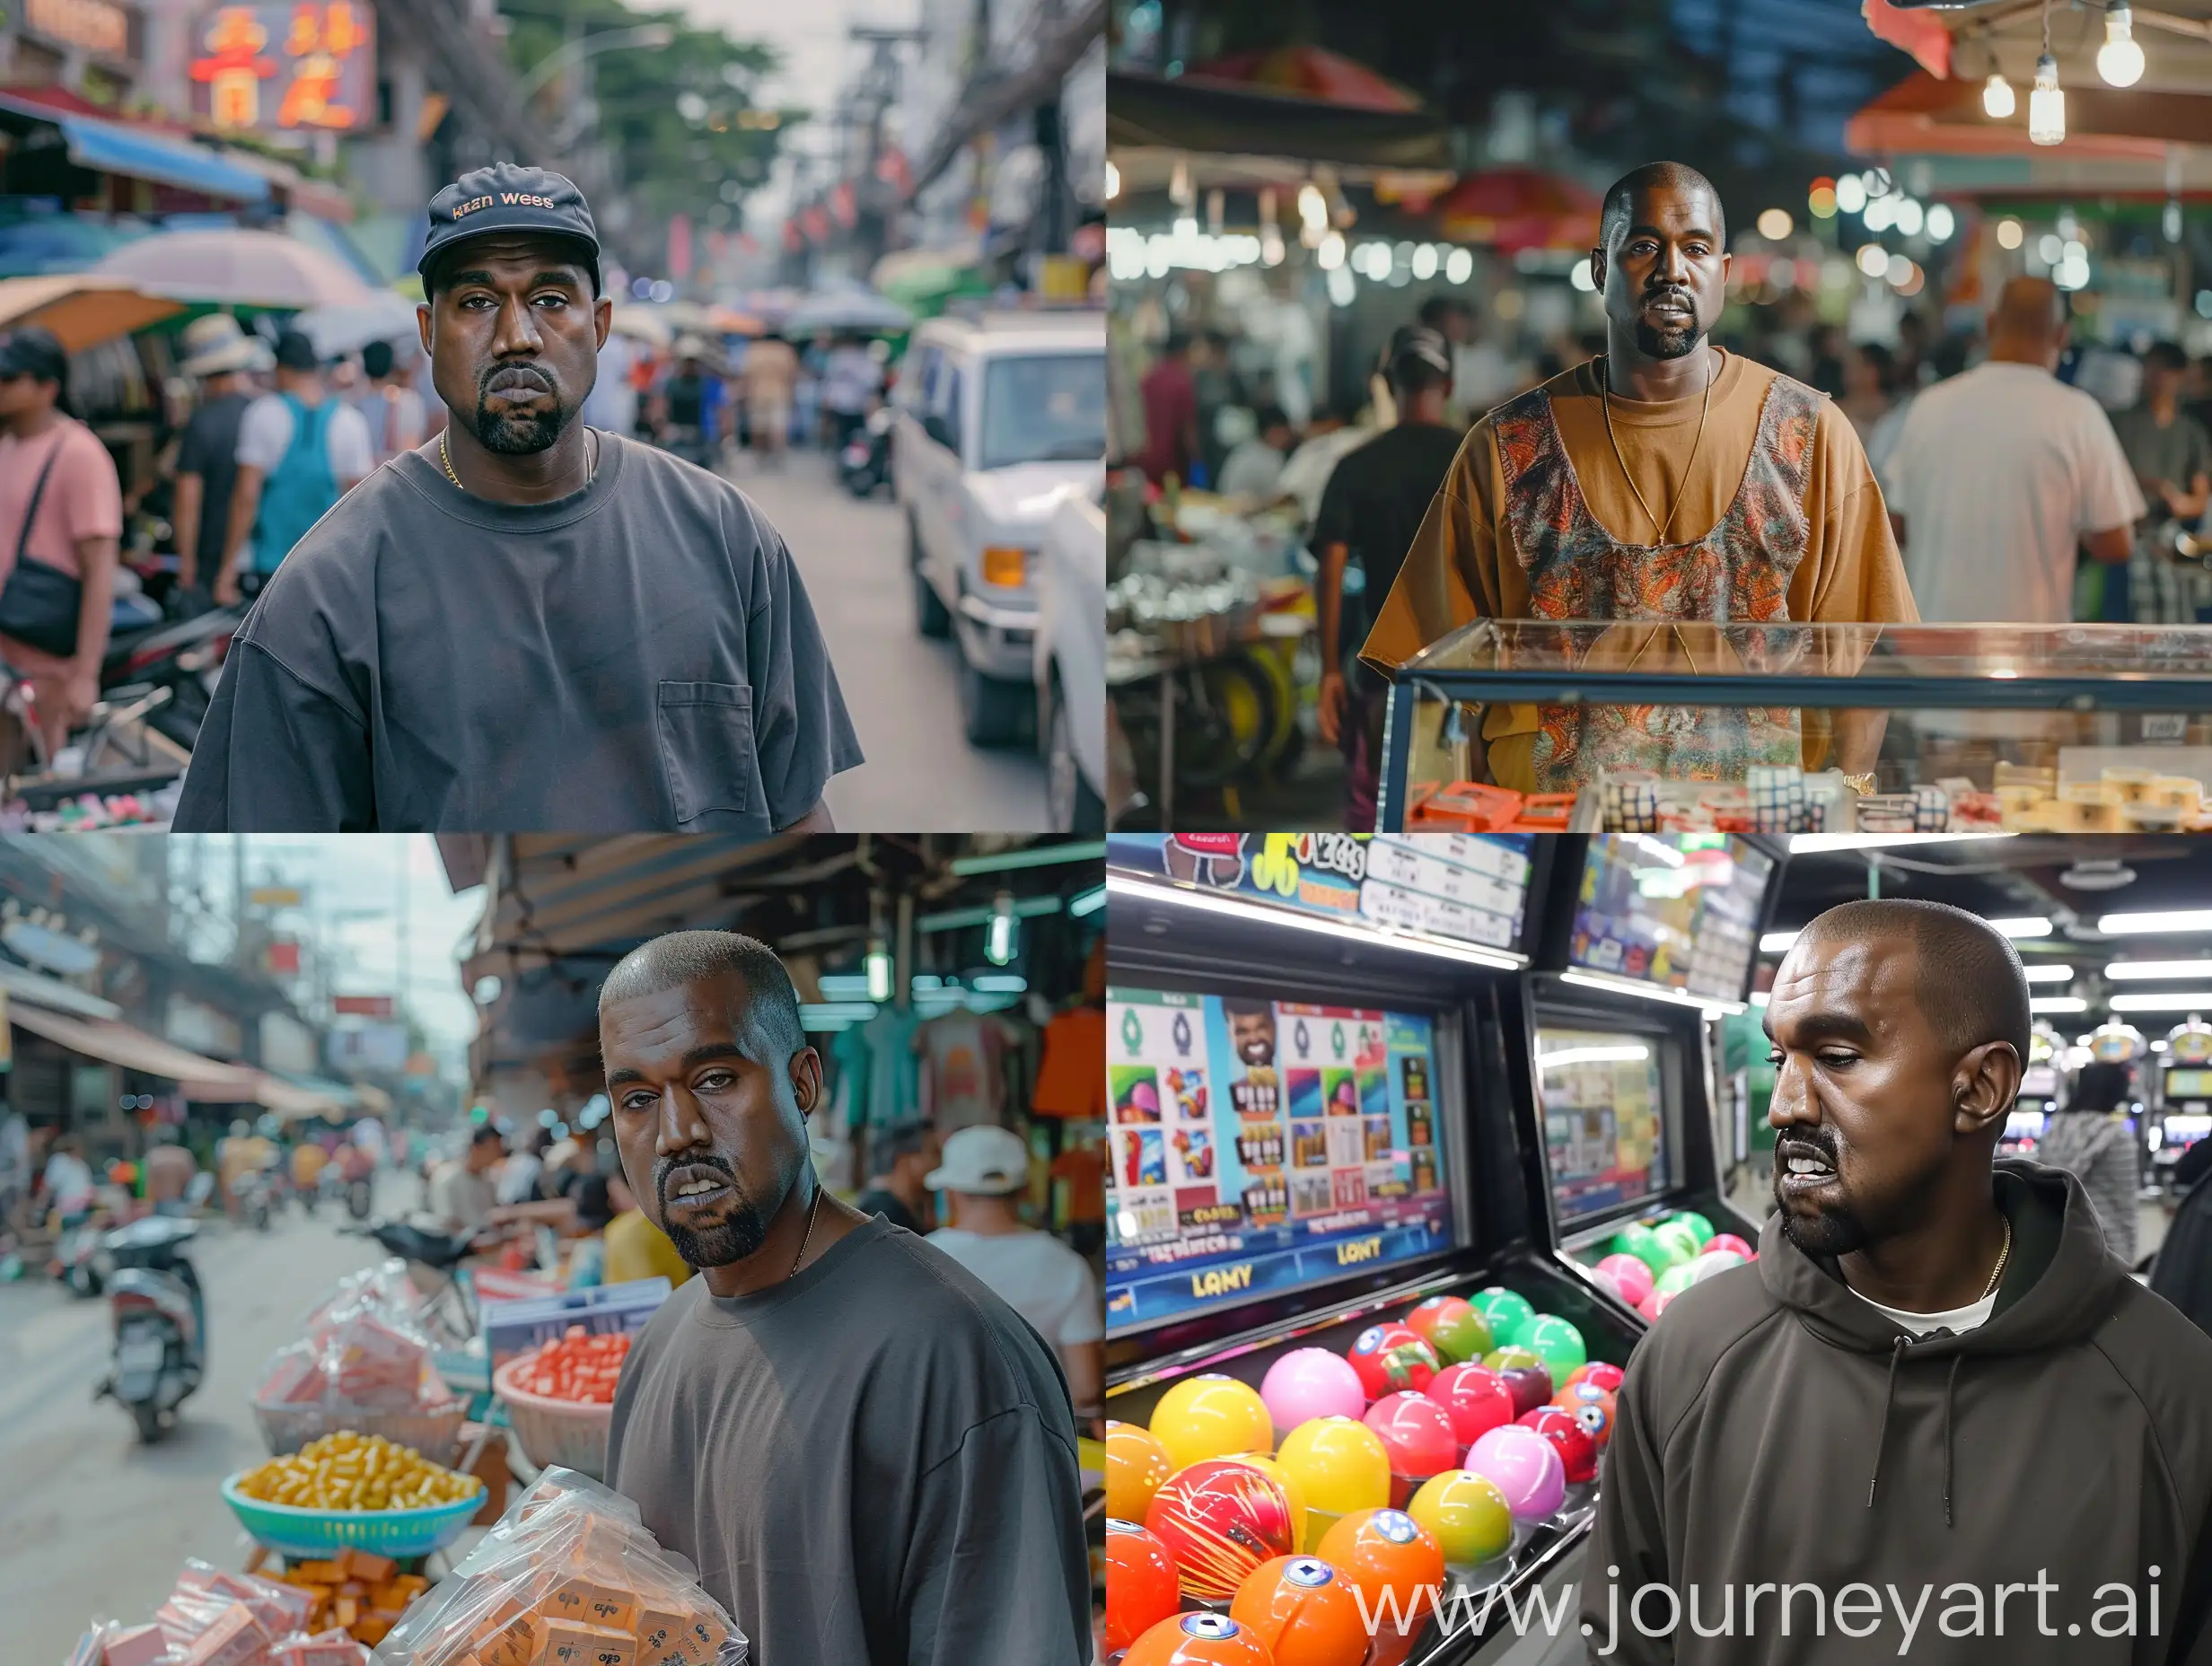 Kanye-West-Selling-Lottery-Tickets-in-Bangkok